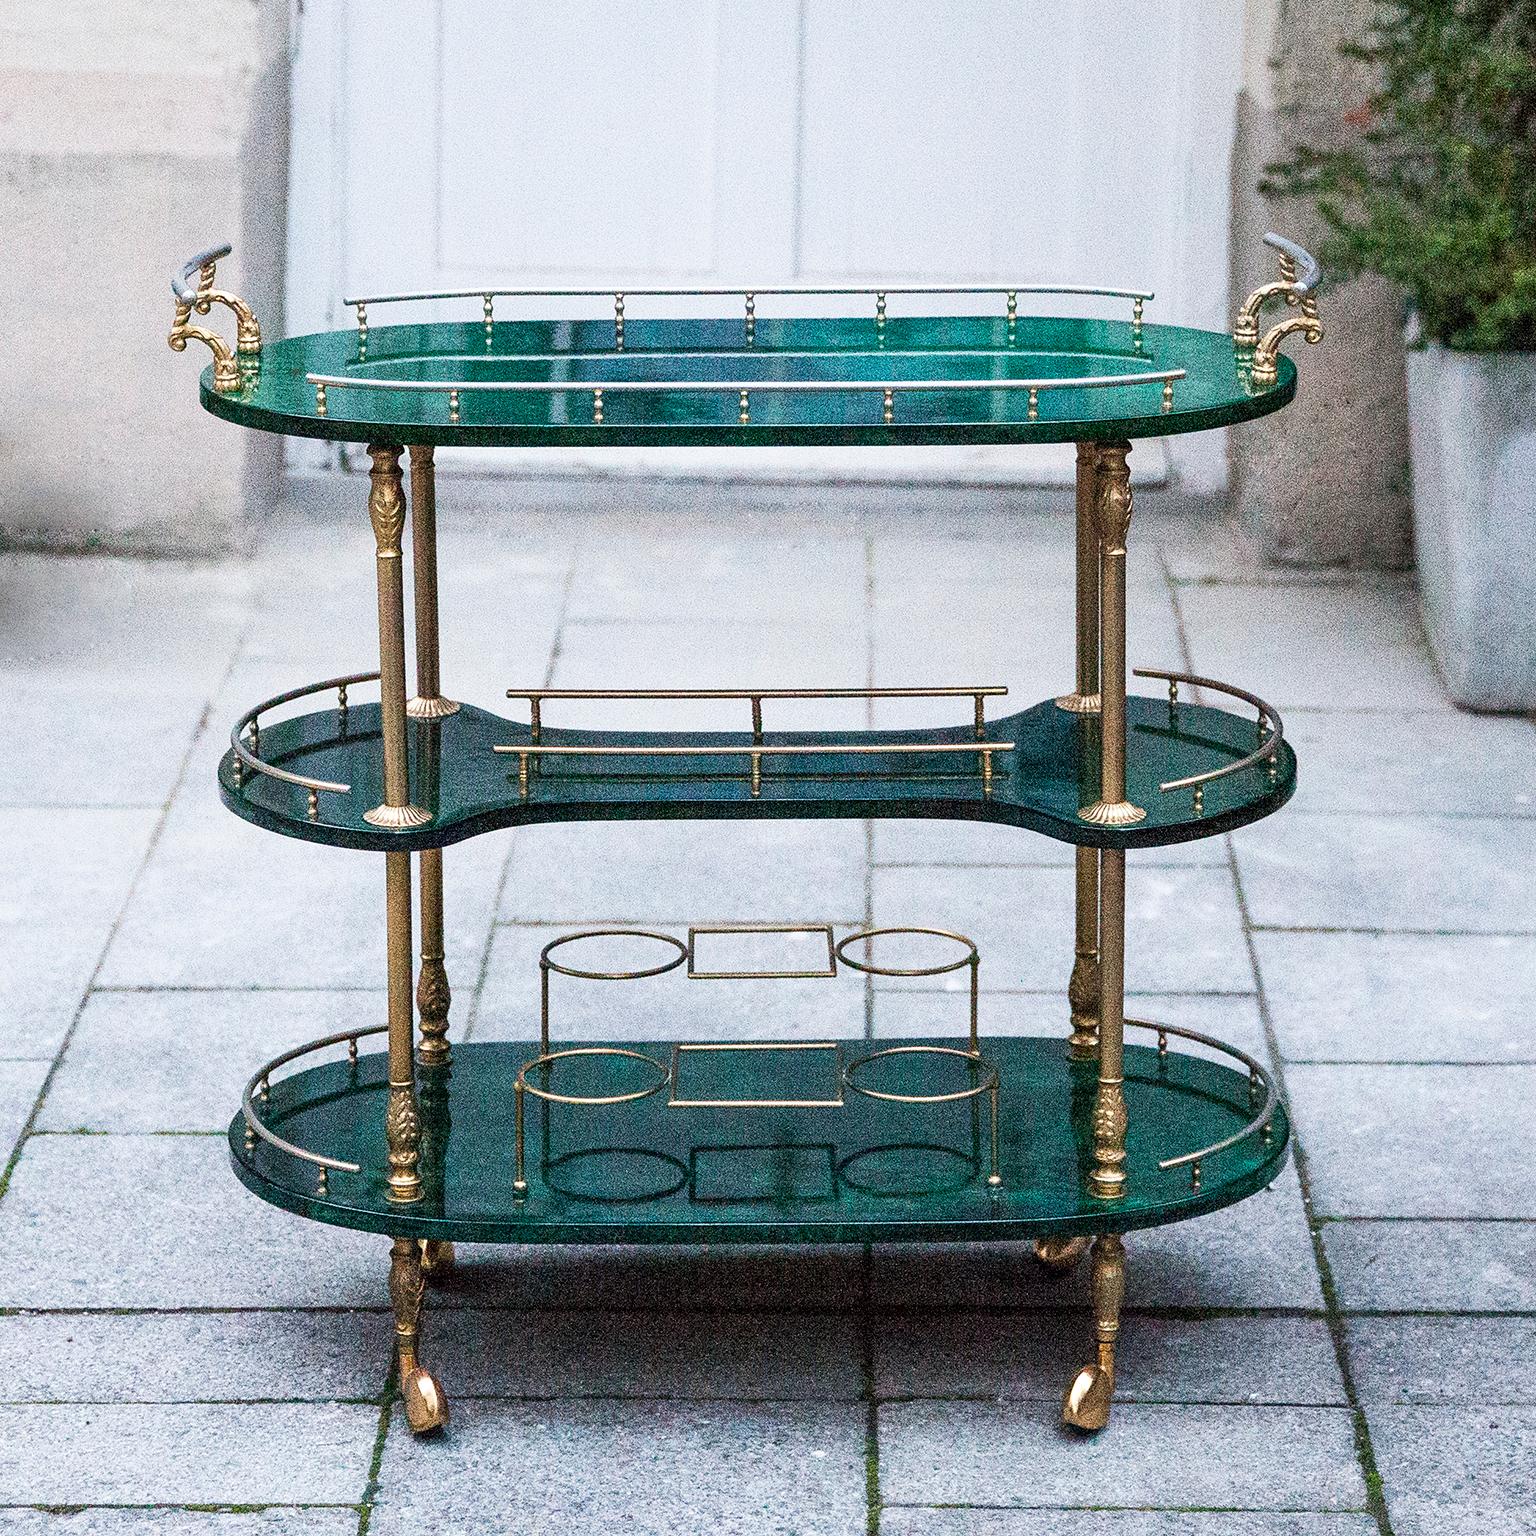 Wonderful bar cart of Aldo Tura in lacquered goatskin.
This serving cart was executed, circa 1960 in a green parchment. Along with artists like Piero Fornasetti and Carlo Bugatti, Aldo Tura (1909-1963) definitely belonged to the mavericks of